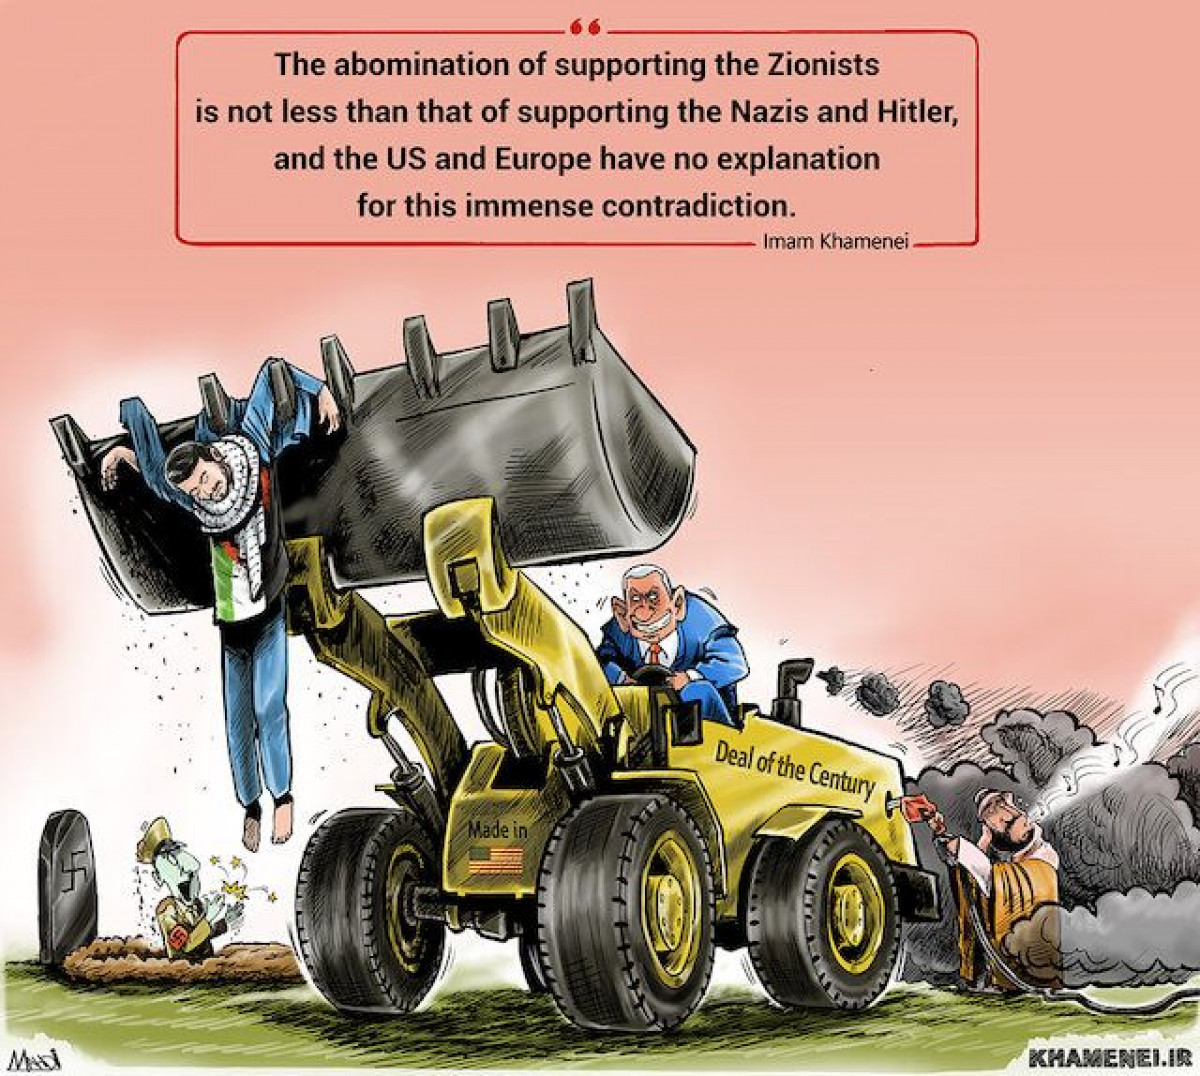 THE ABOMINATION OF SUPPORTING THE ZIONISTS IS